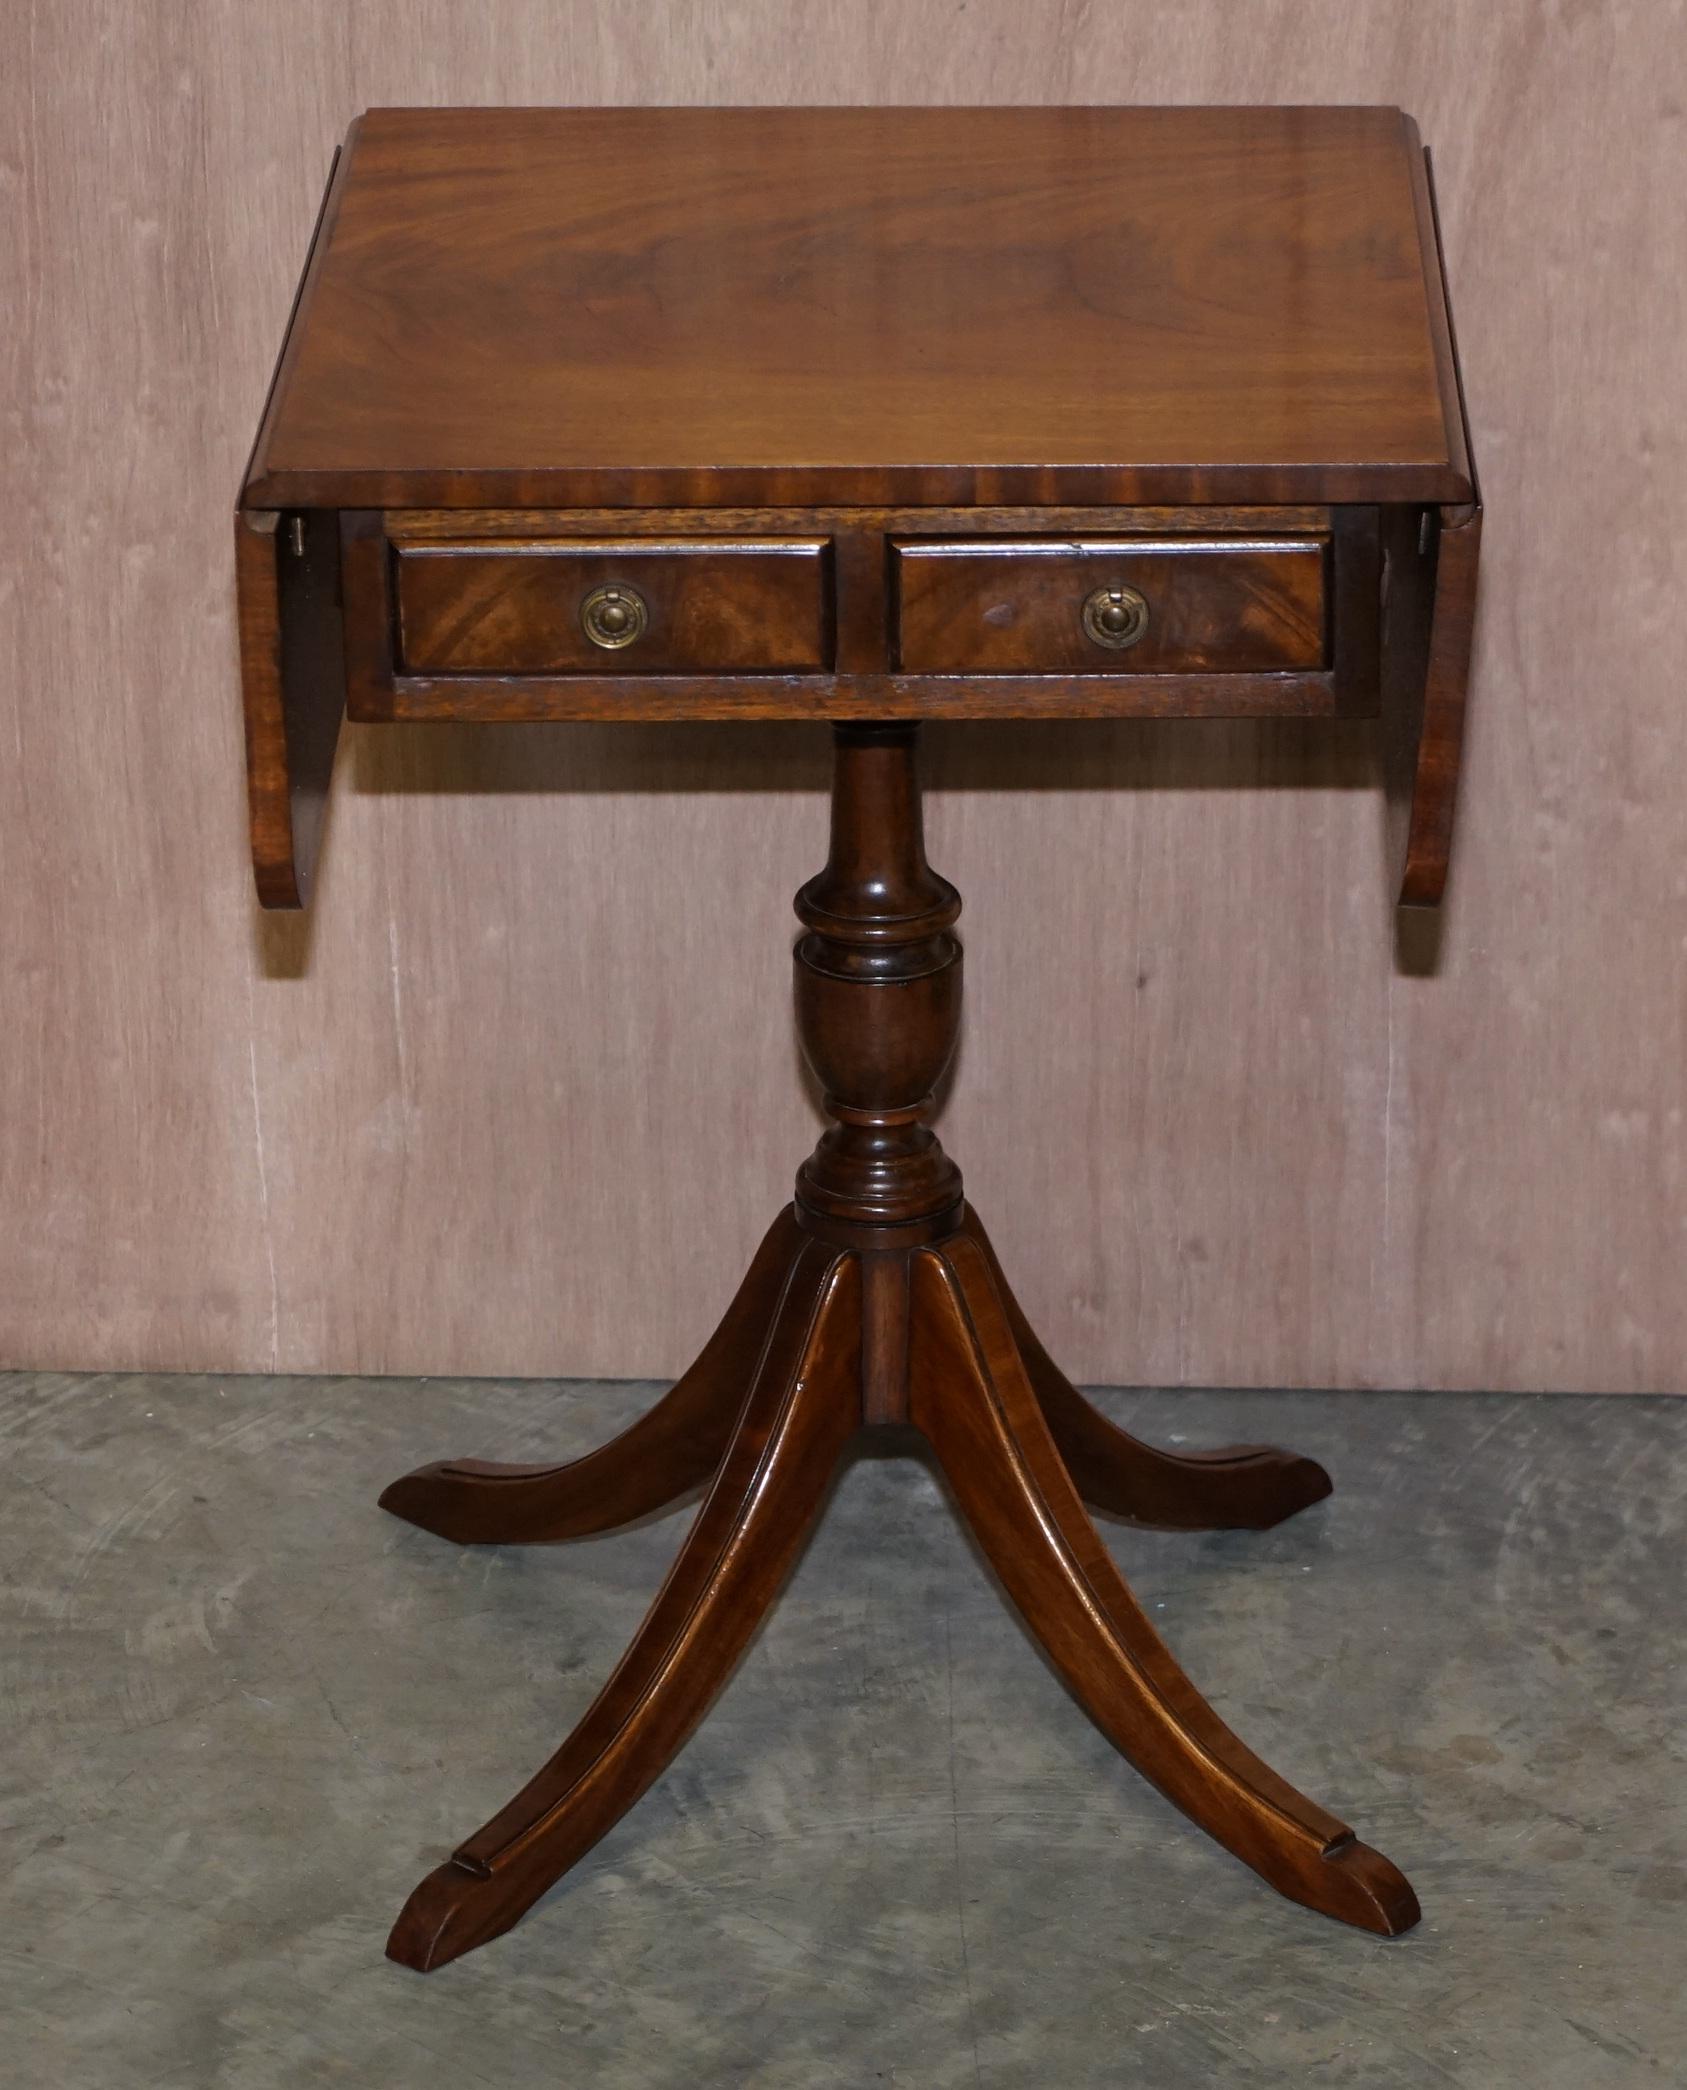 We are delighted to offer this lovely flamed mahogany Bevan Funnell extending side table with two drawers

This table is very well made, its extends so can be used as a card table or for serving lunch

We have cleaned waxed and polished it from